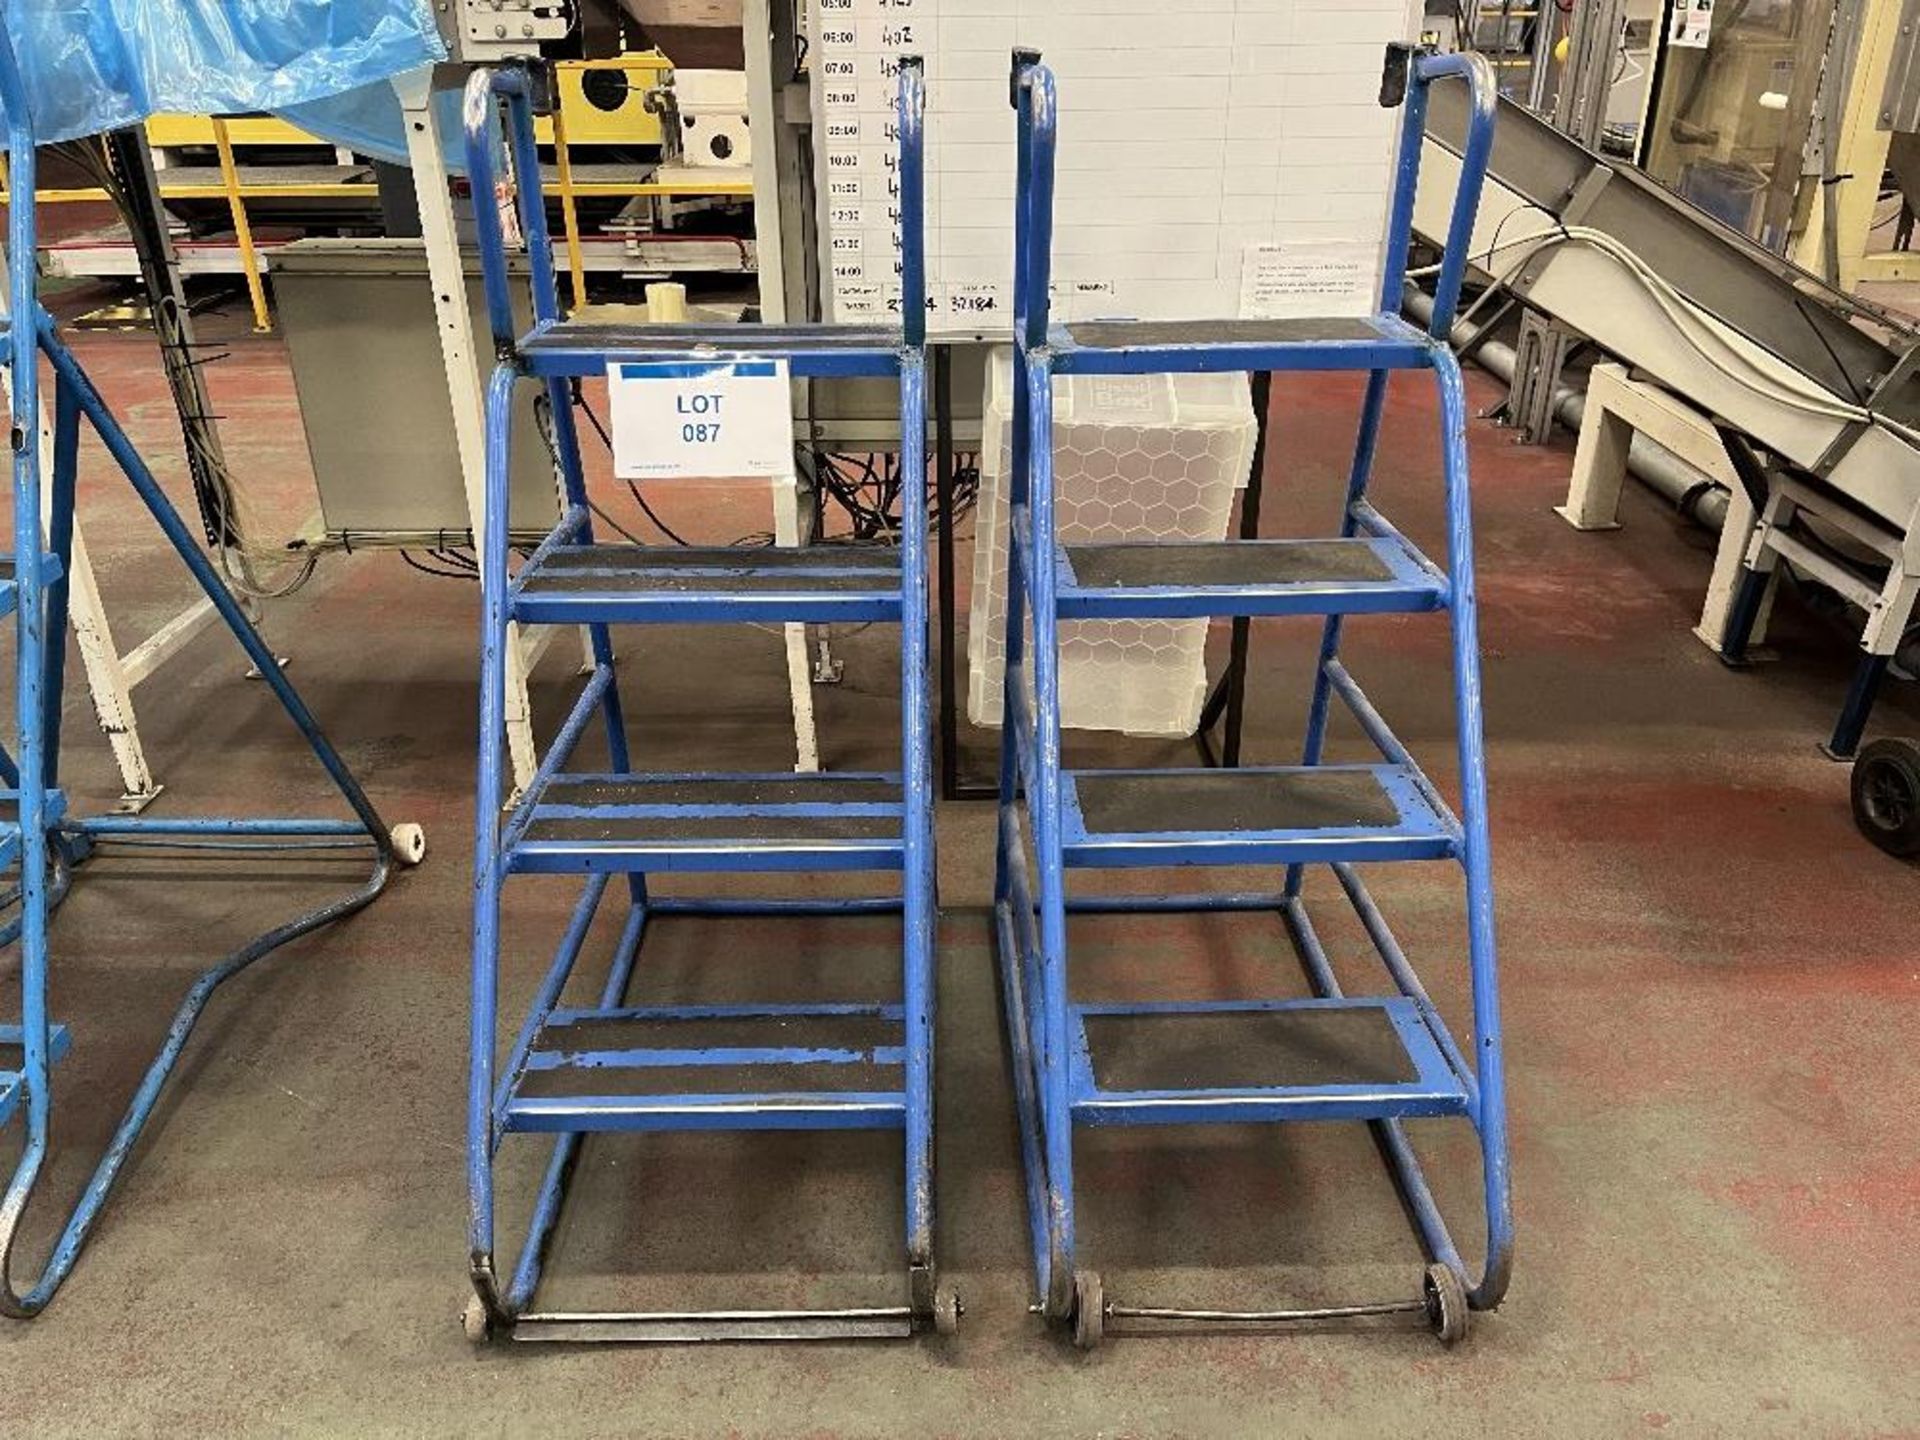 (2) Sets of airport ladders